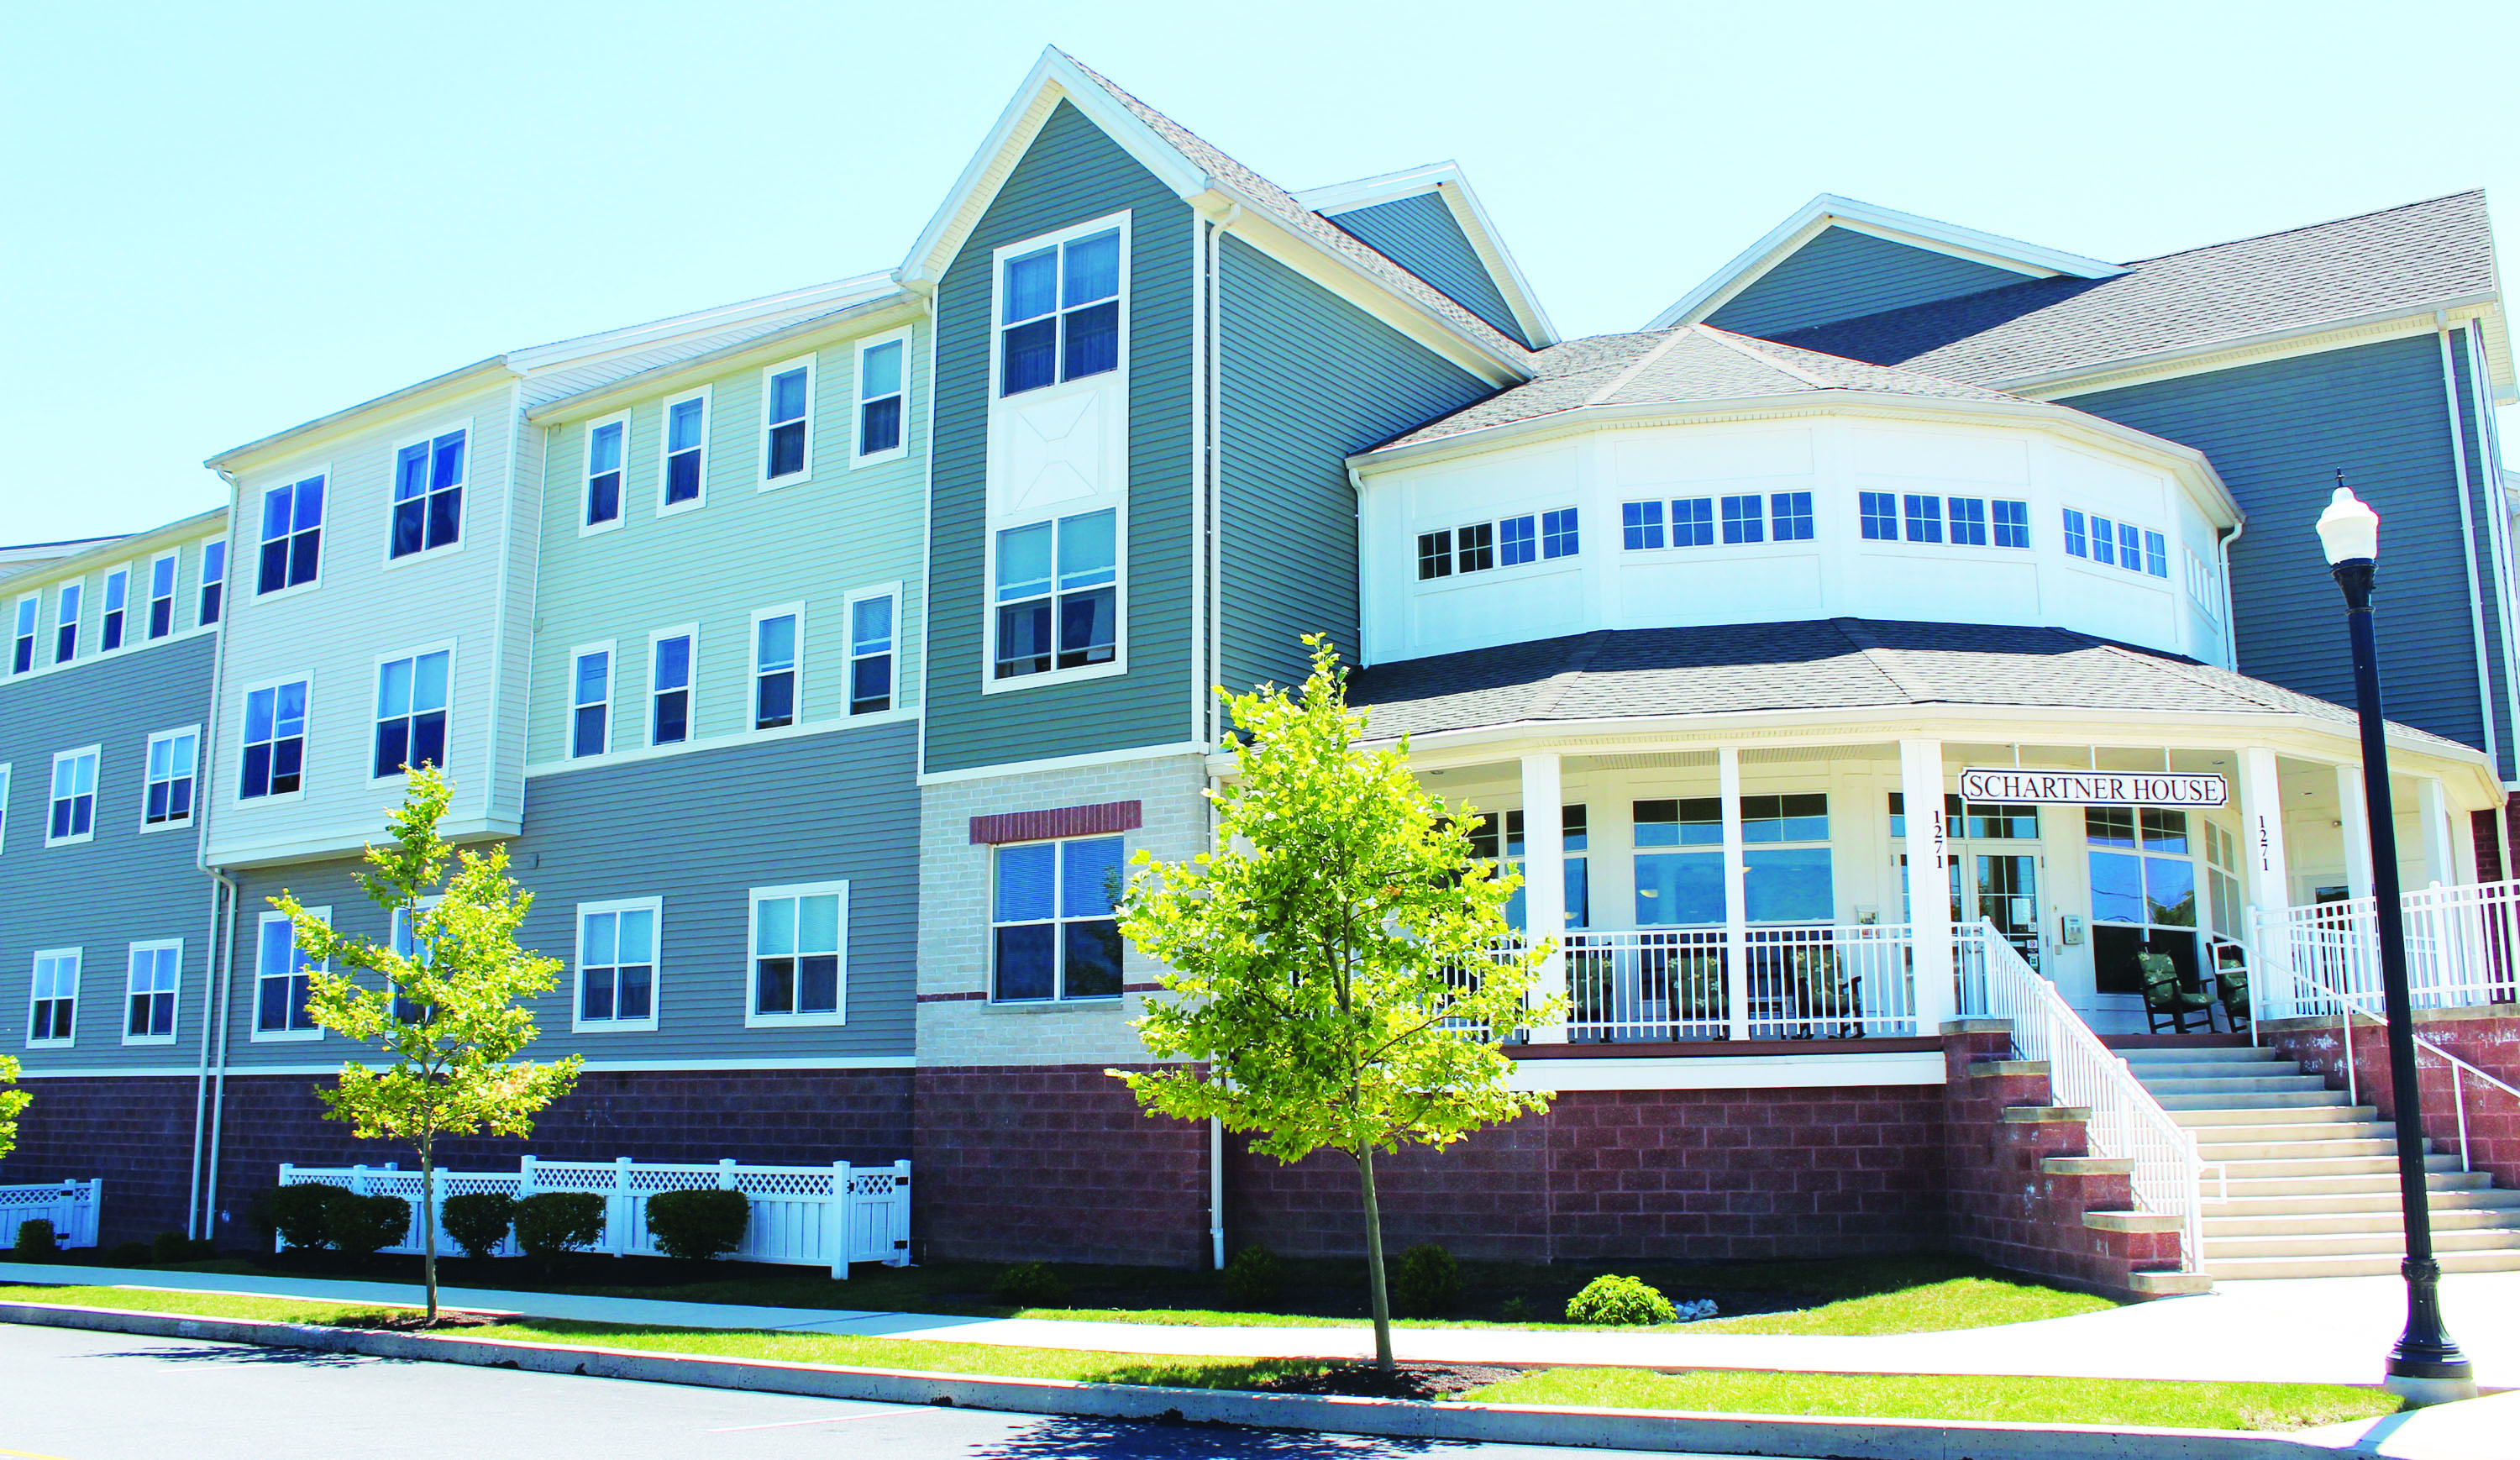 Schartner House at Carroll Village provides people age 62 and over with affordable senior housing apartment accommodations. Carroll Village is a part of Presbyterian Senior Living’s Aging Services Net